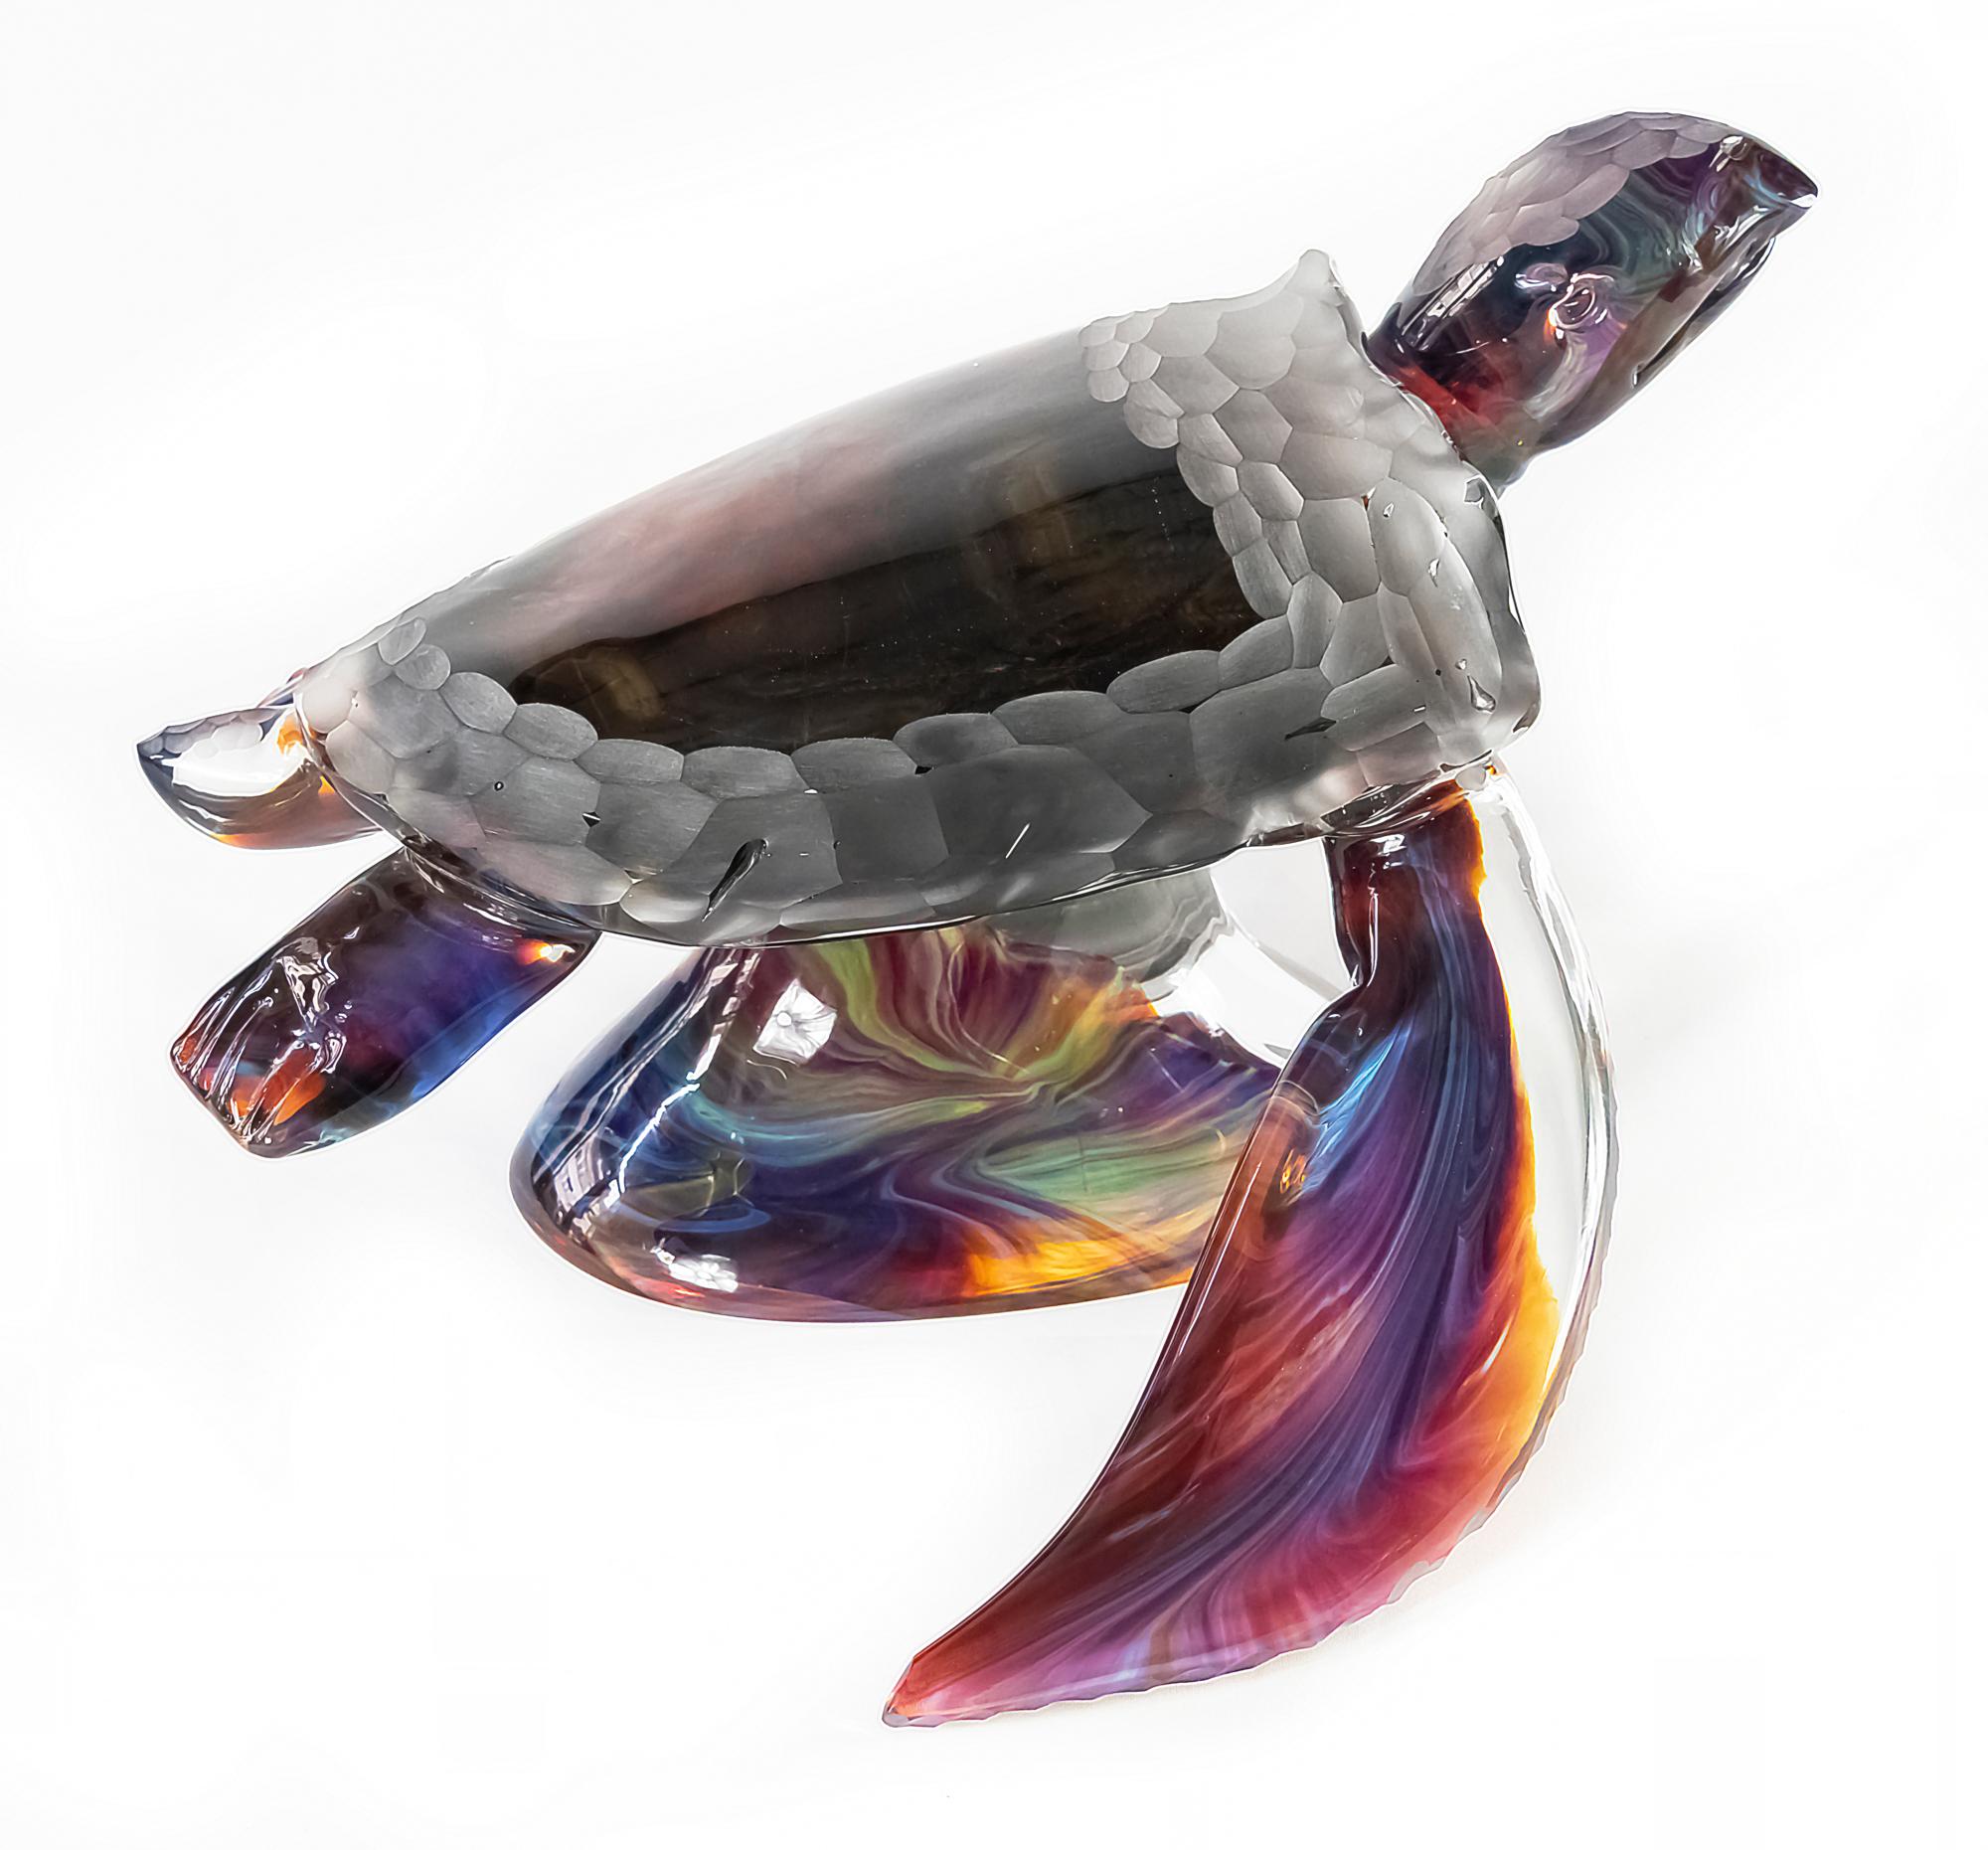 Large Italian handmade Murano glass sculpture of turtle on the base.
Created and signed by Fabio Tagliapietra.
The base is separate from the turtle sculpture. 
The sculpture element is in merging colors.
 